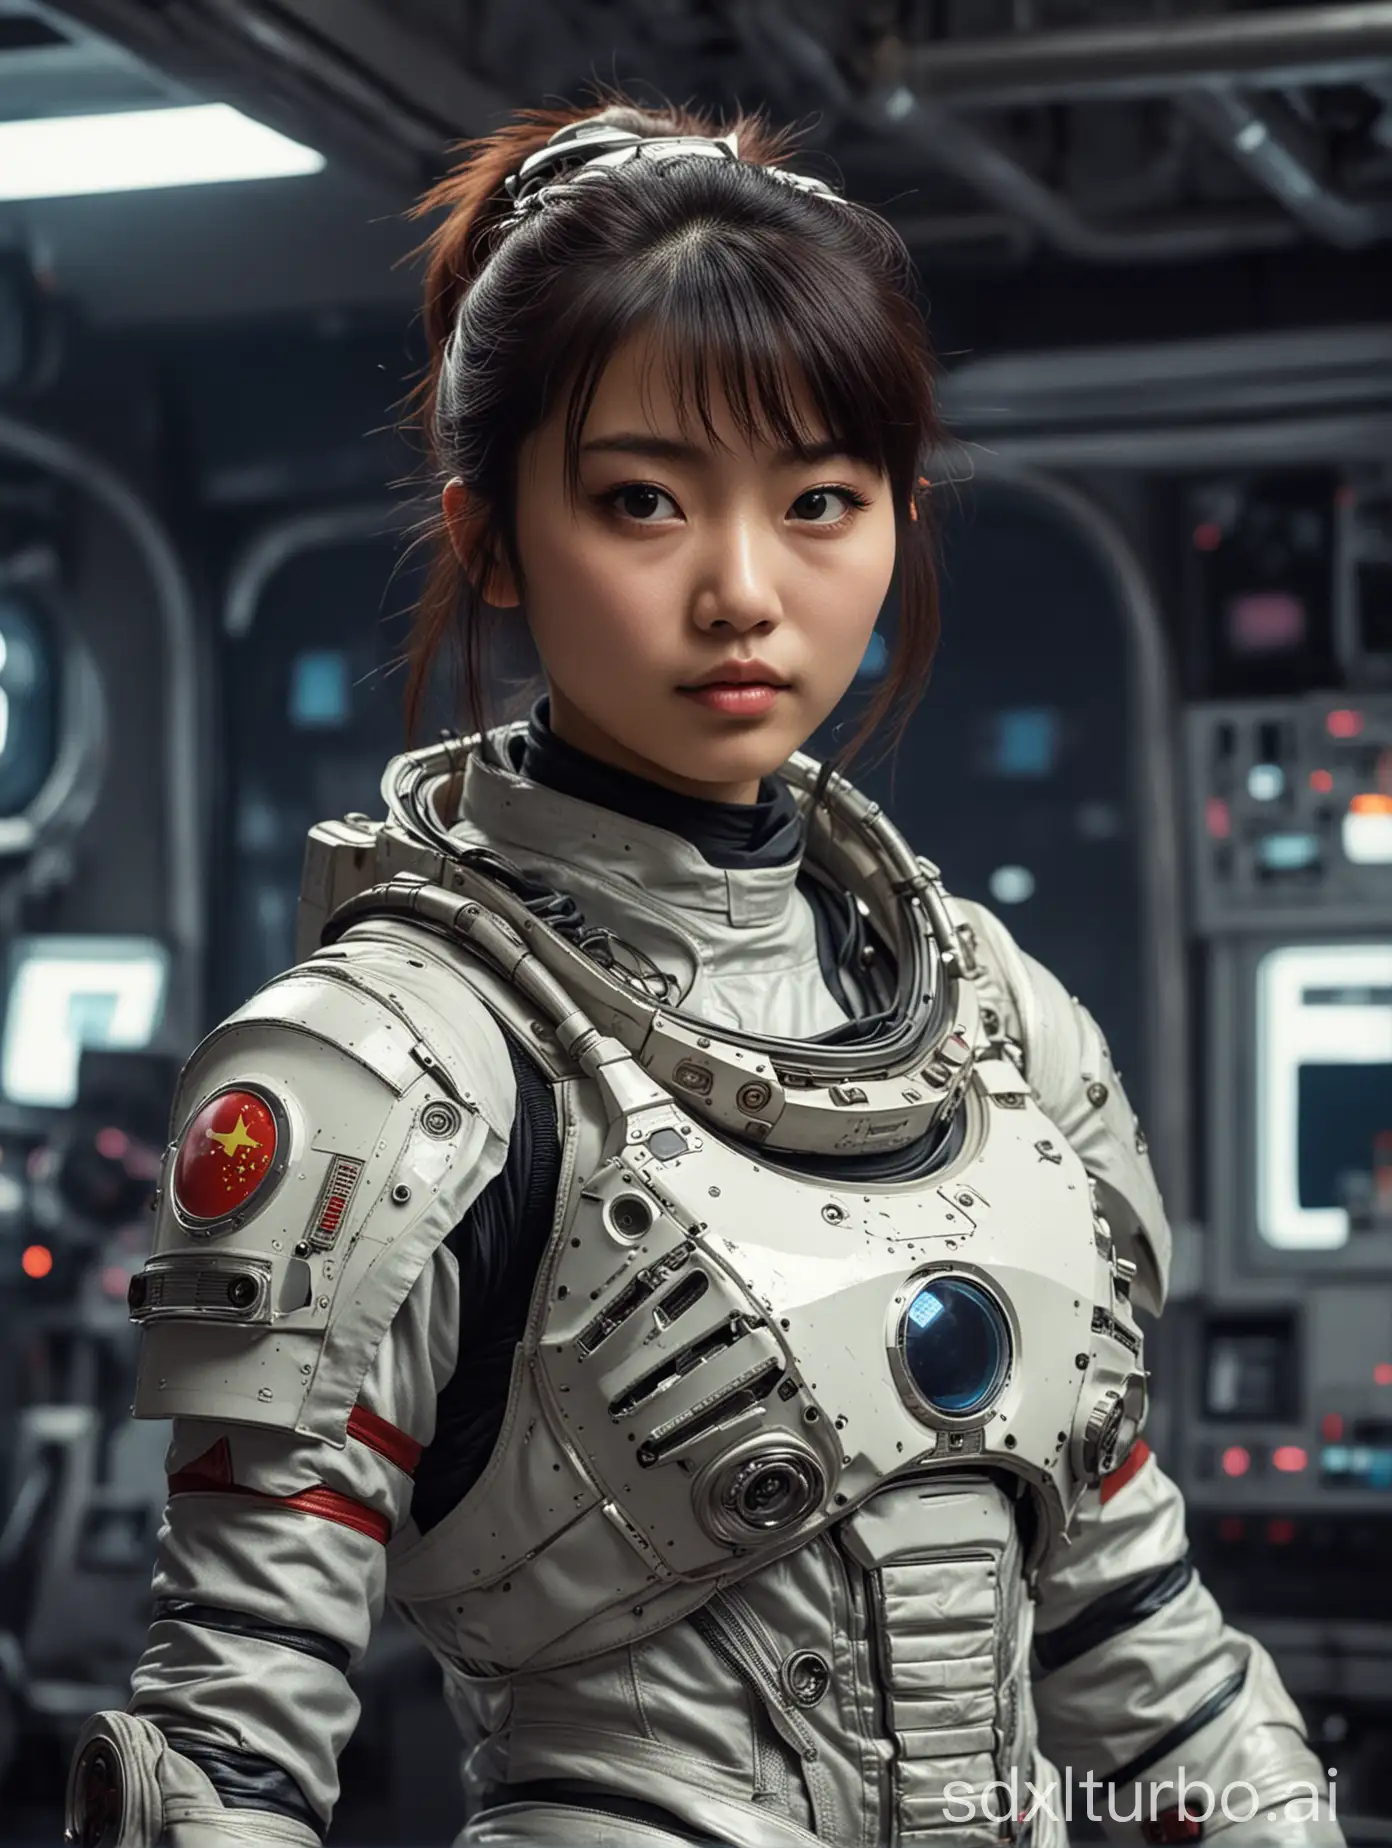 Chinese-Girl-Astronaut-in-80s-Tech-Space-Center